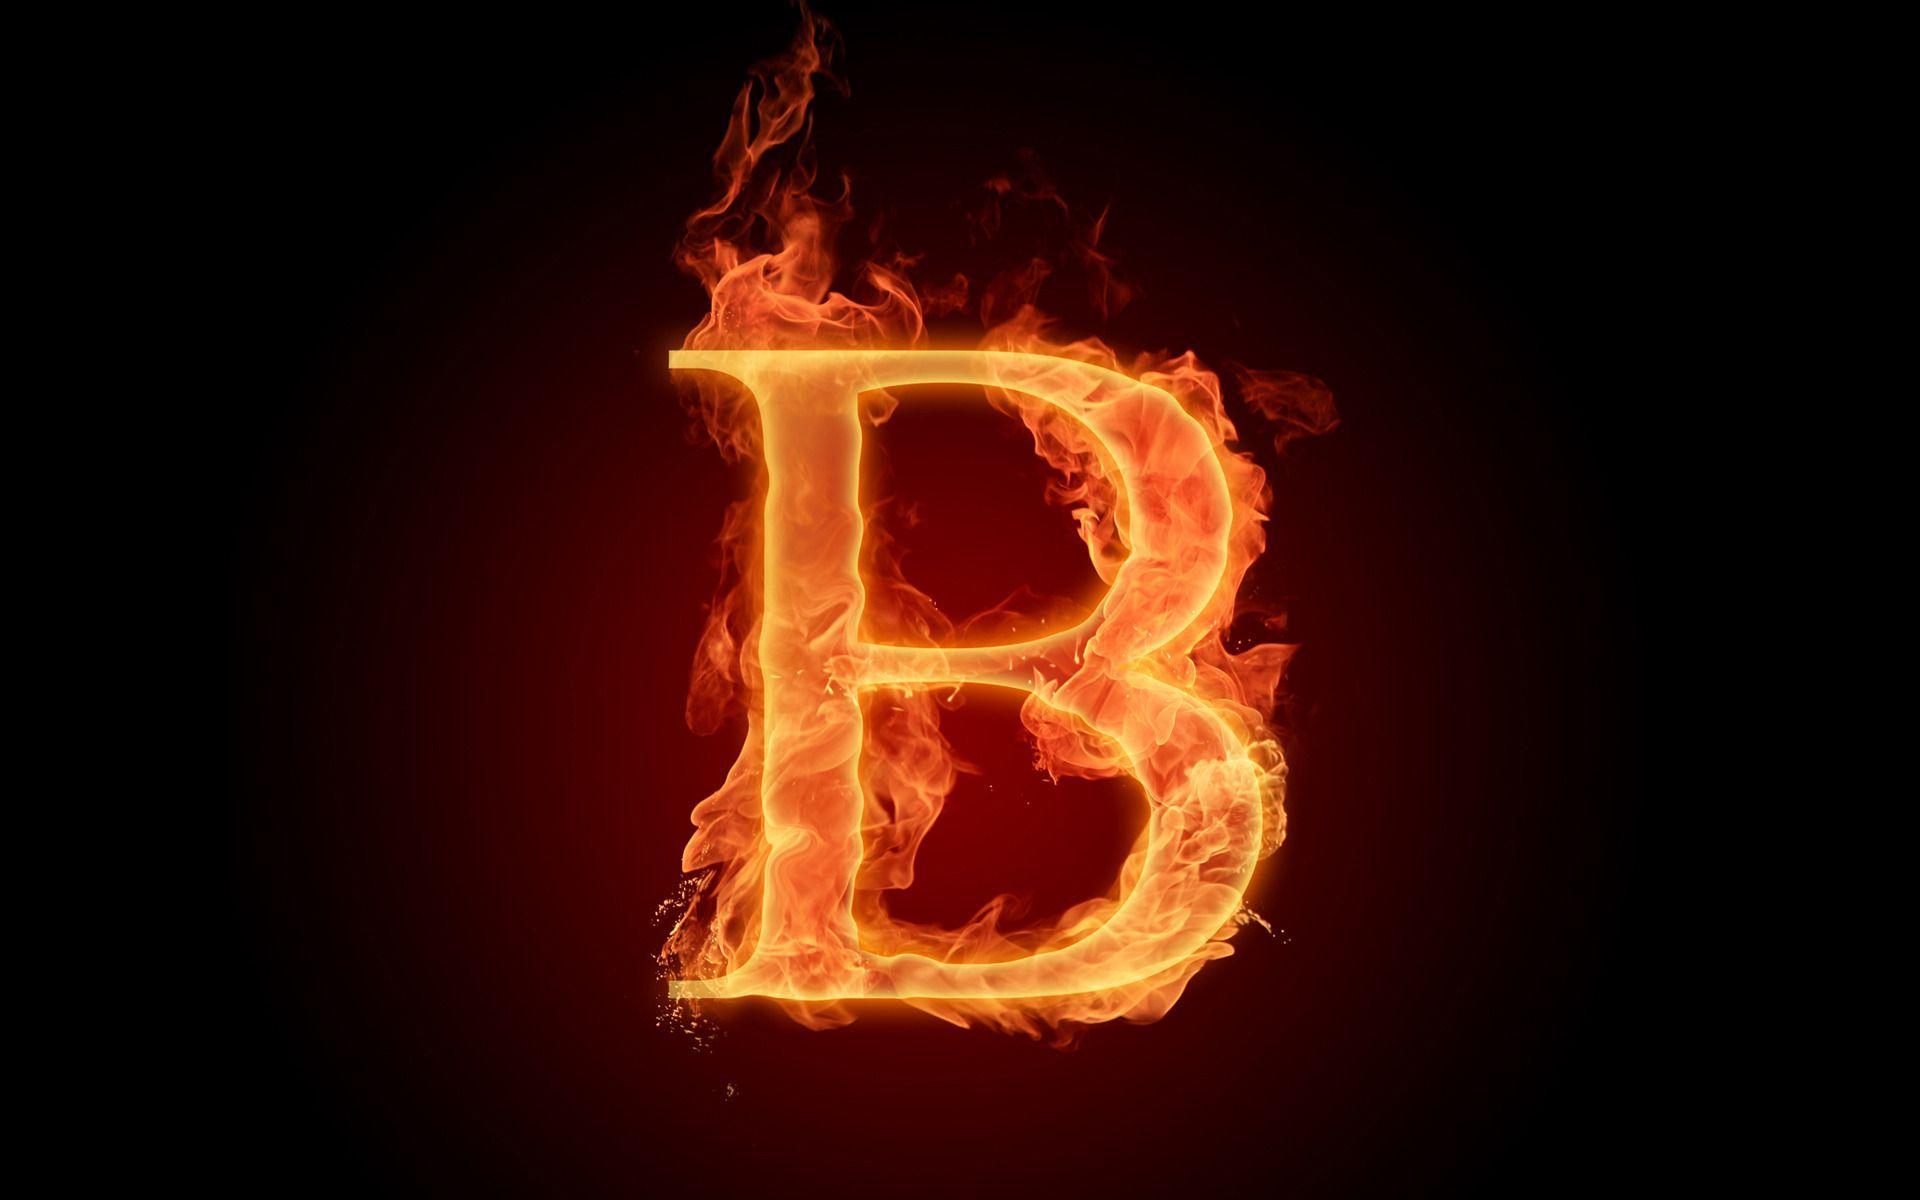 I'm a fire sign. This is my last initial in flames. Fire